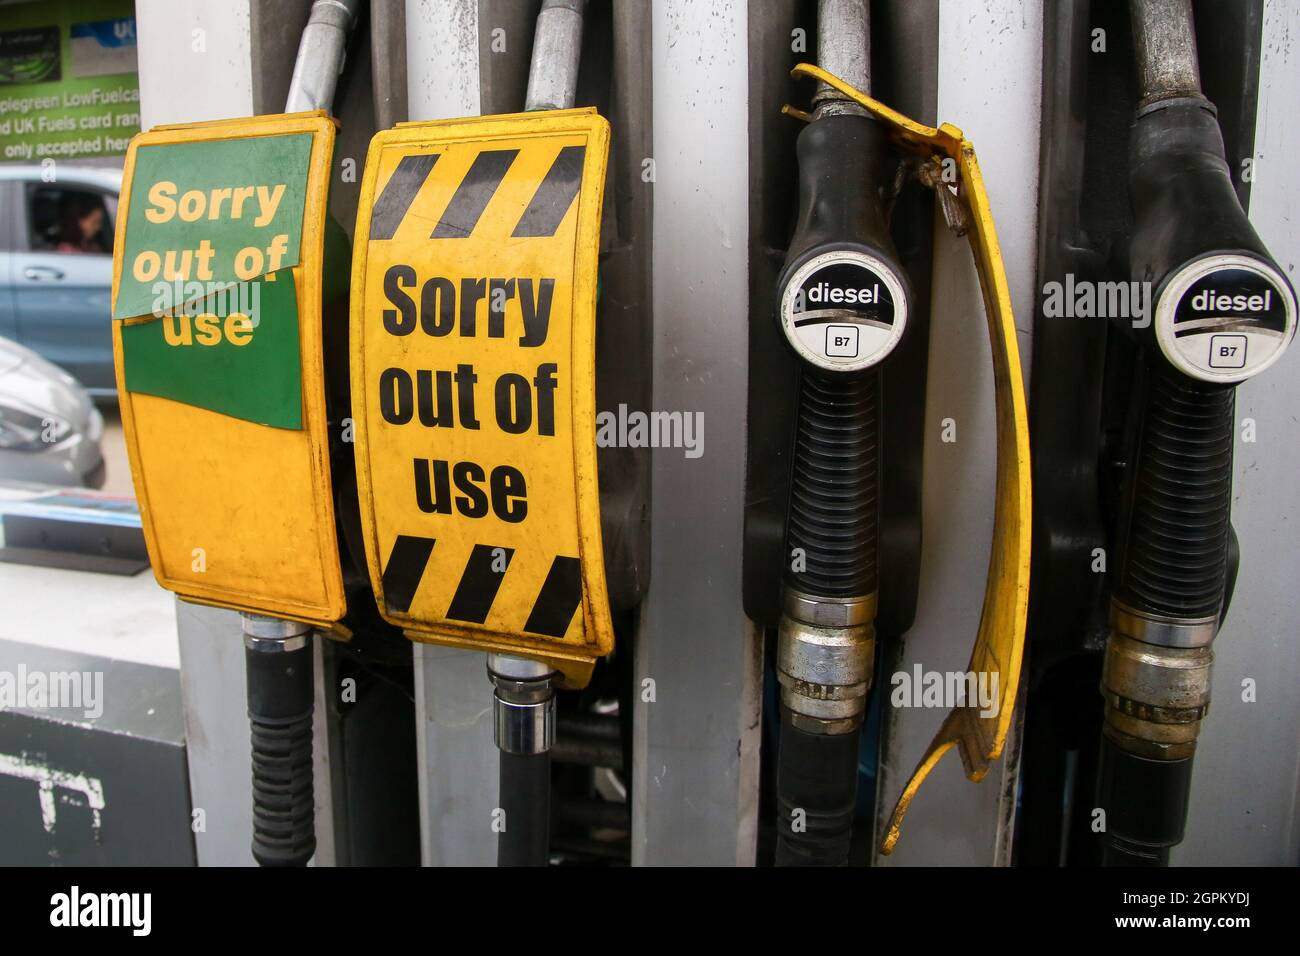 A 'sorry out of use' sign at a petrol station as motorists continue to panic buying fuel, amid fears of fuel running out due to a shortage of HGV (Heavy Goods Vehicle) drivers. Stock Photo